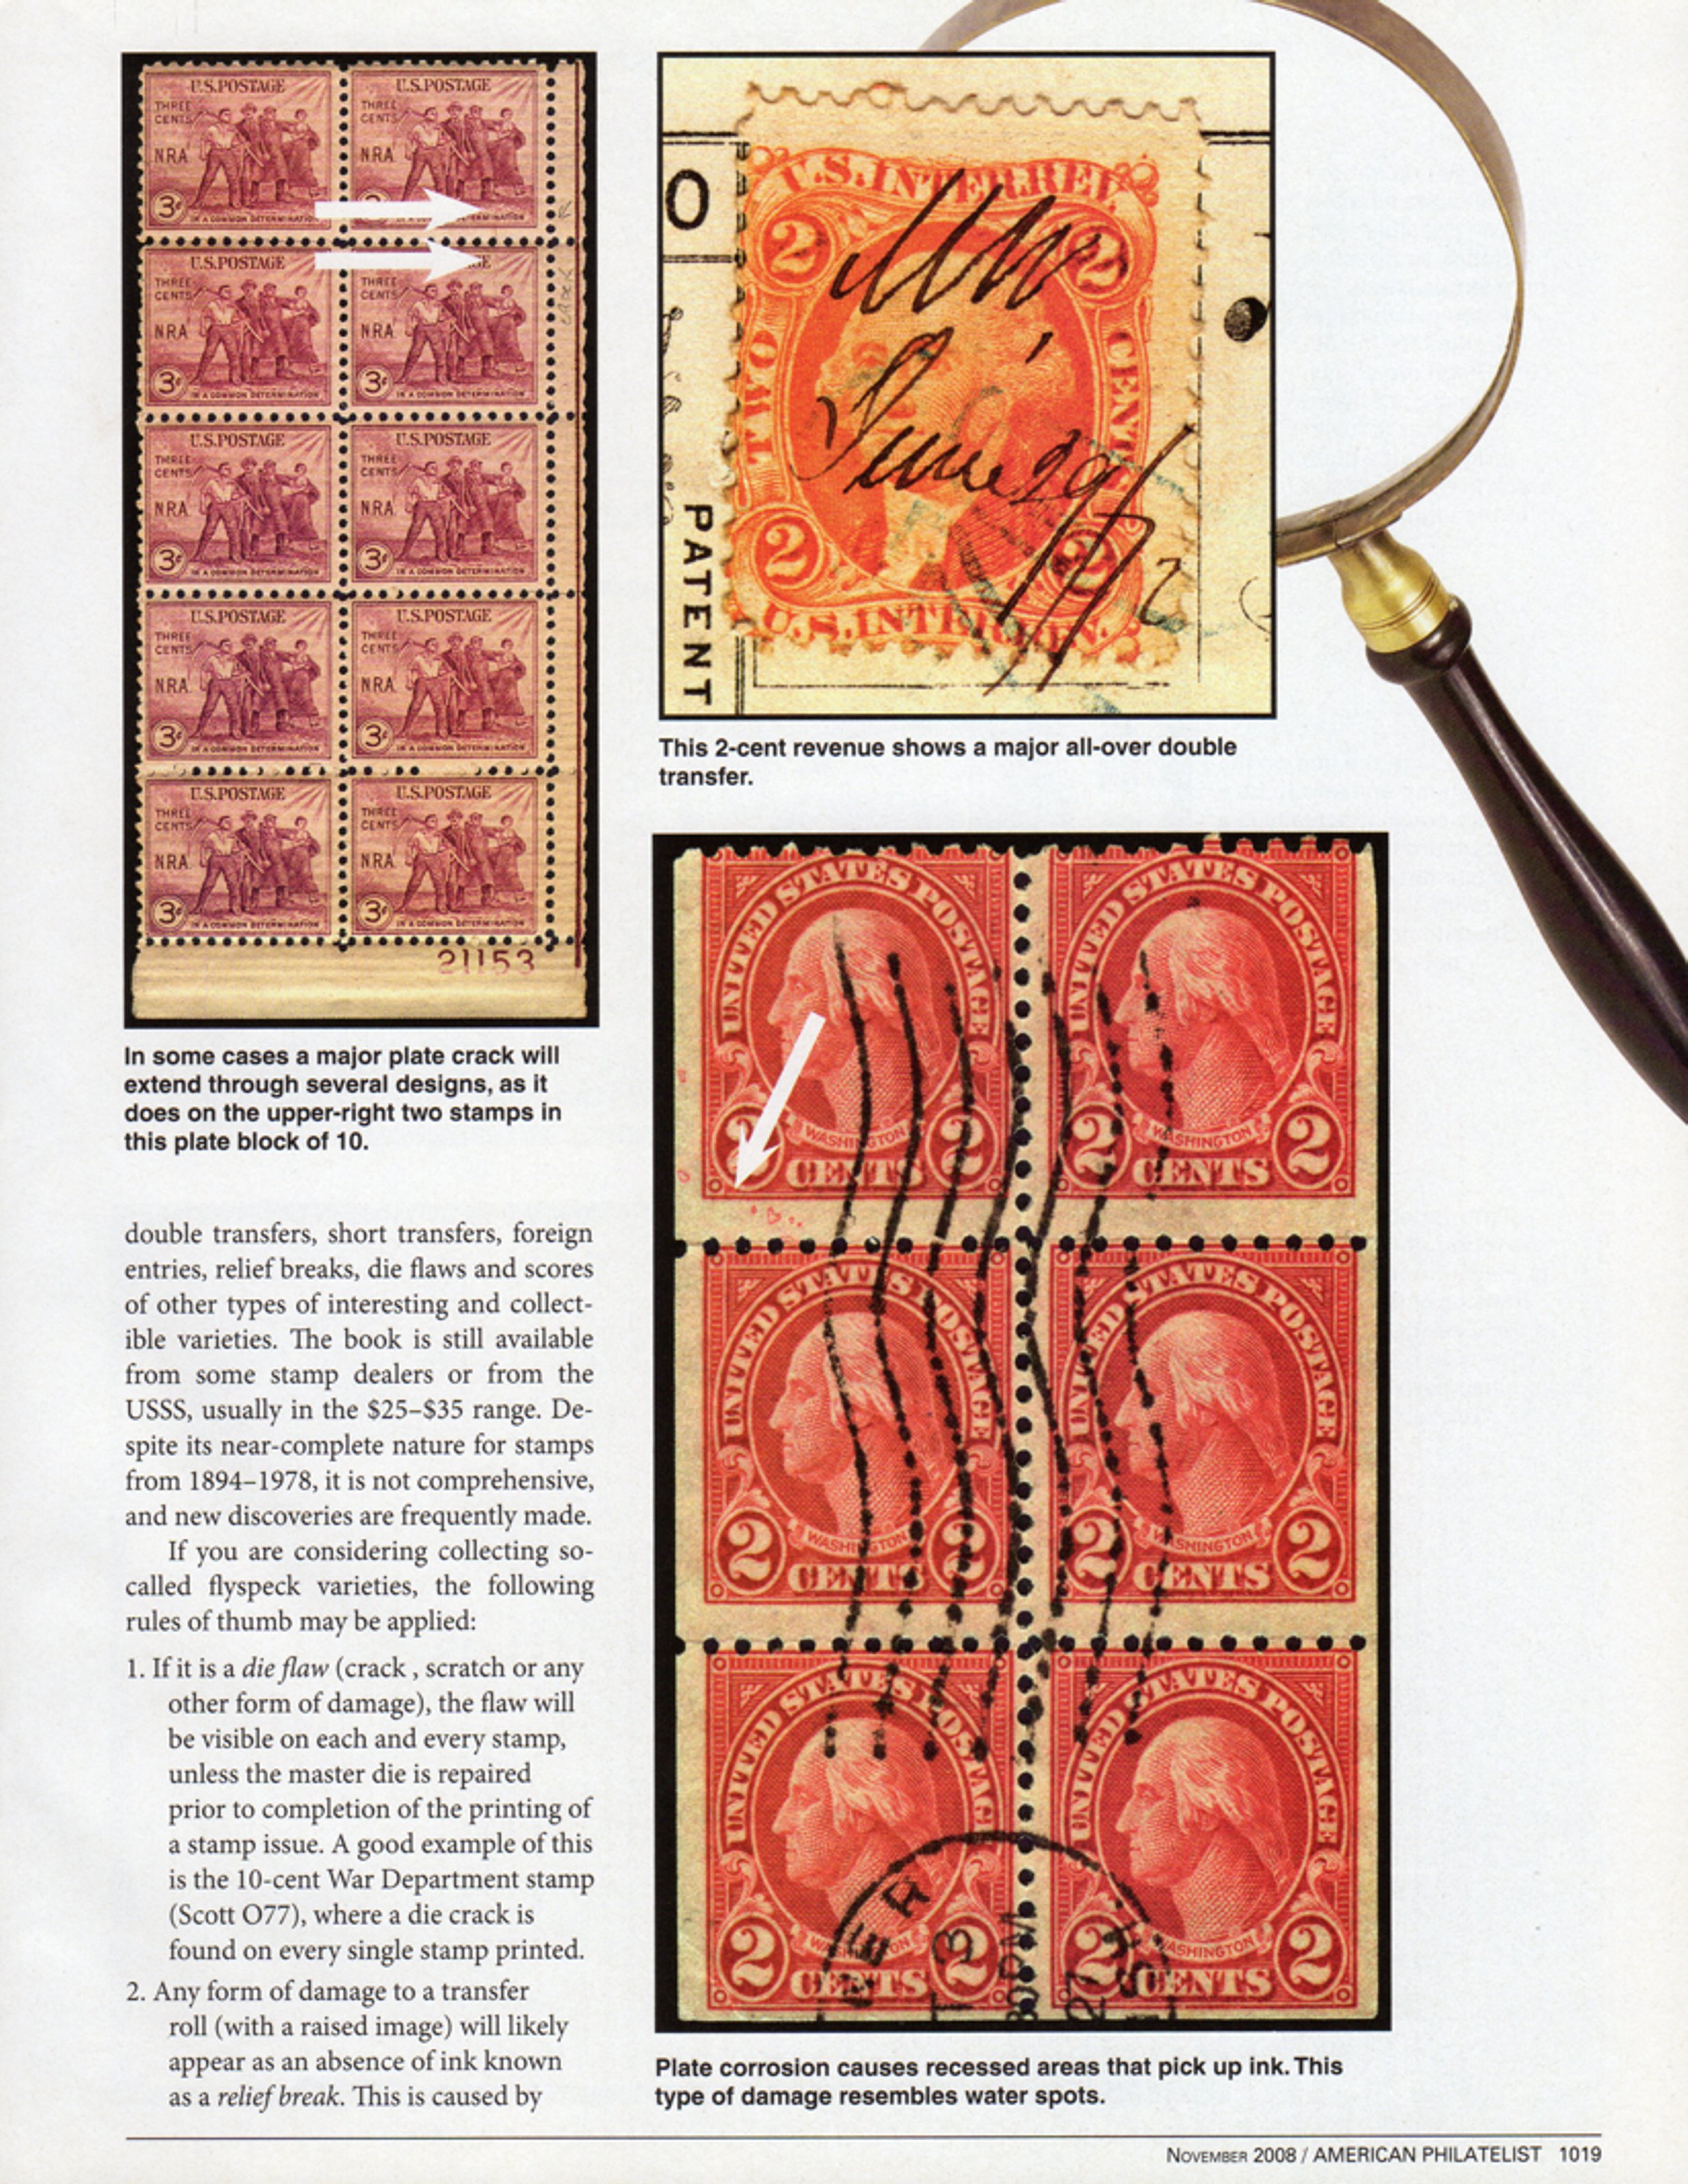 stamp errors, stamp errors, EFO, Youngblood, double transfers, short transfers, foreign entries, relief breaks, die flaws, flyspeck varieties, die flaw, crack, scratch, War epartment stamp, Scott O77